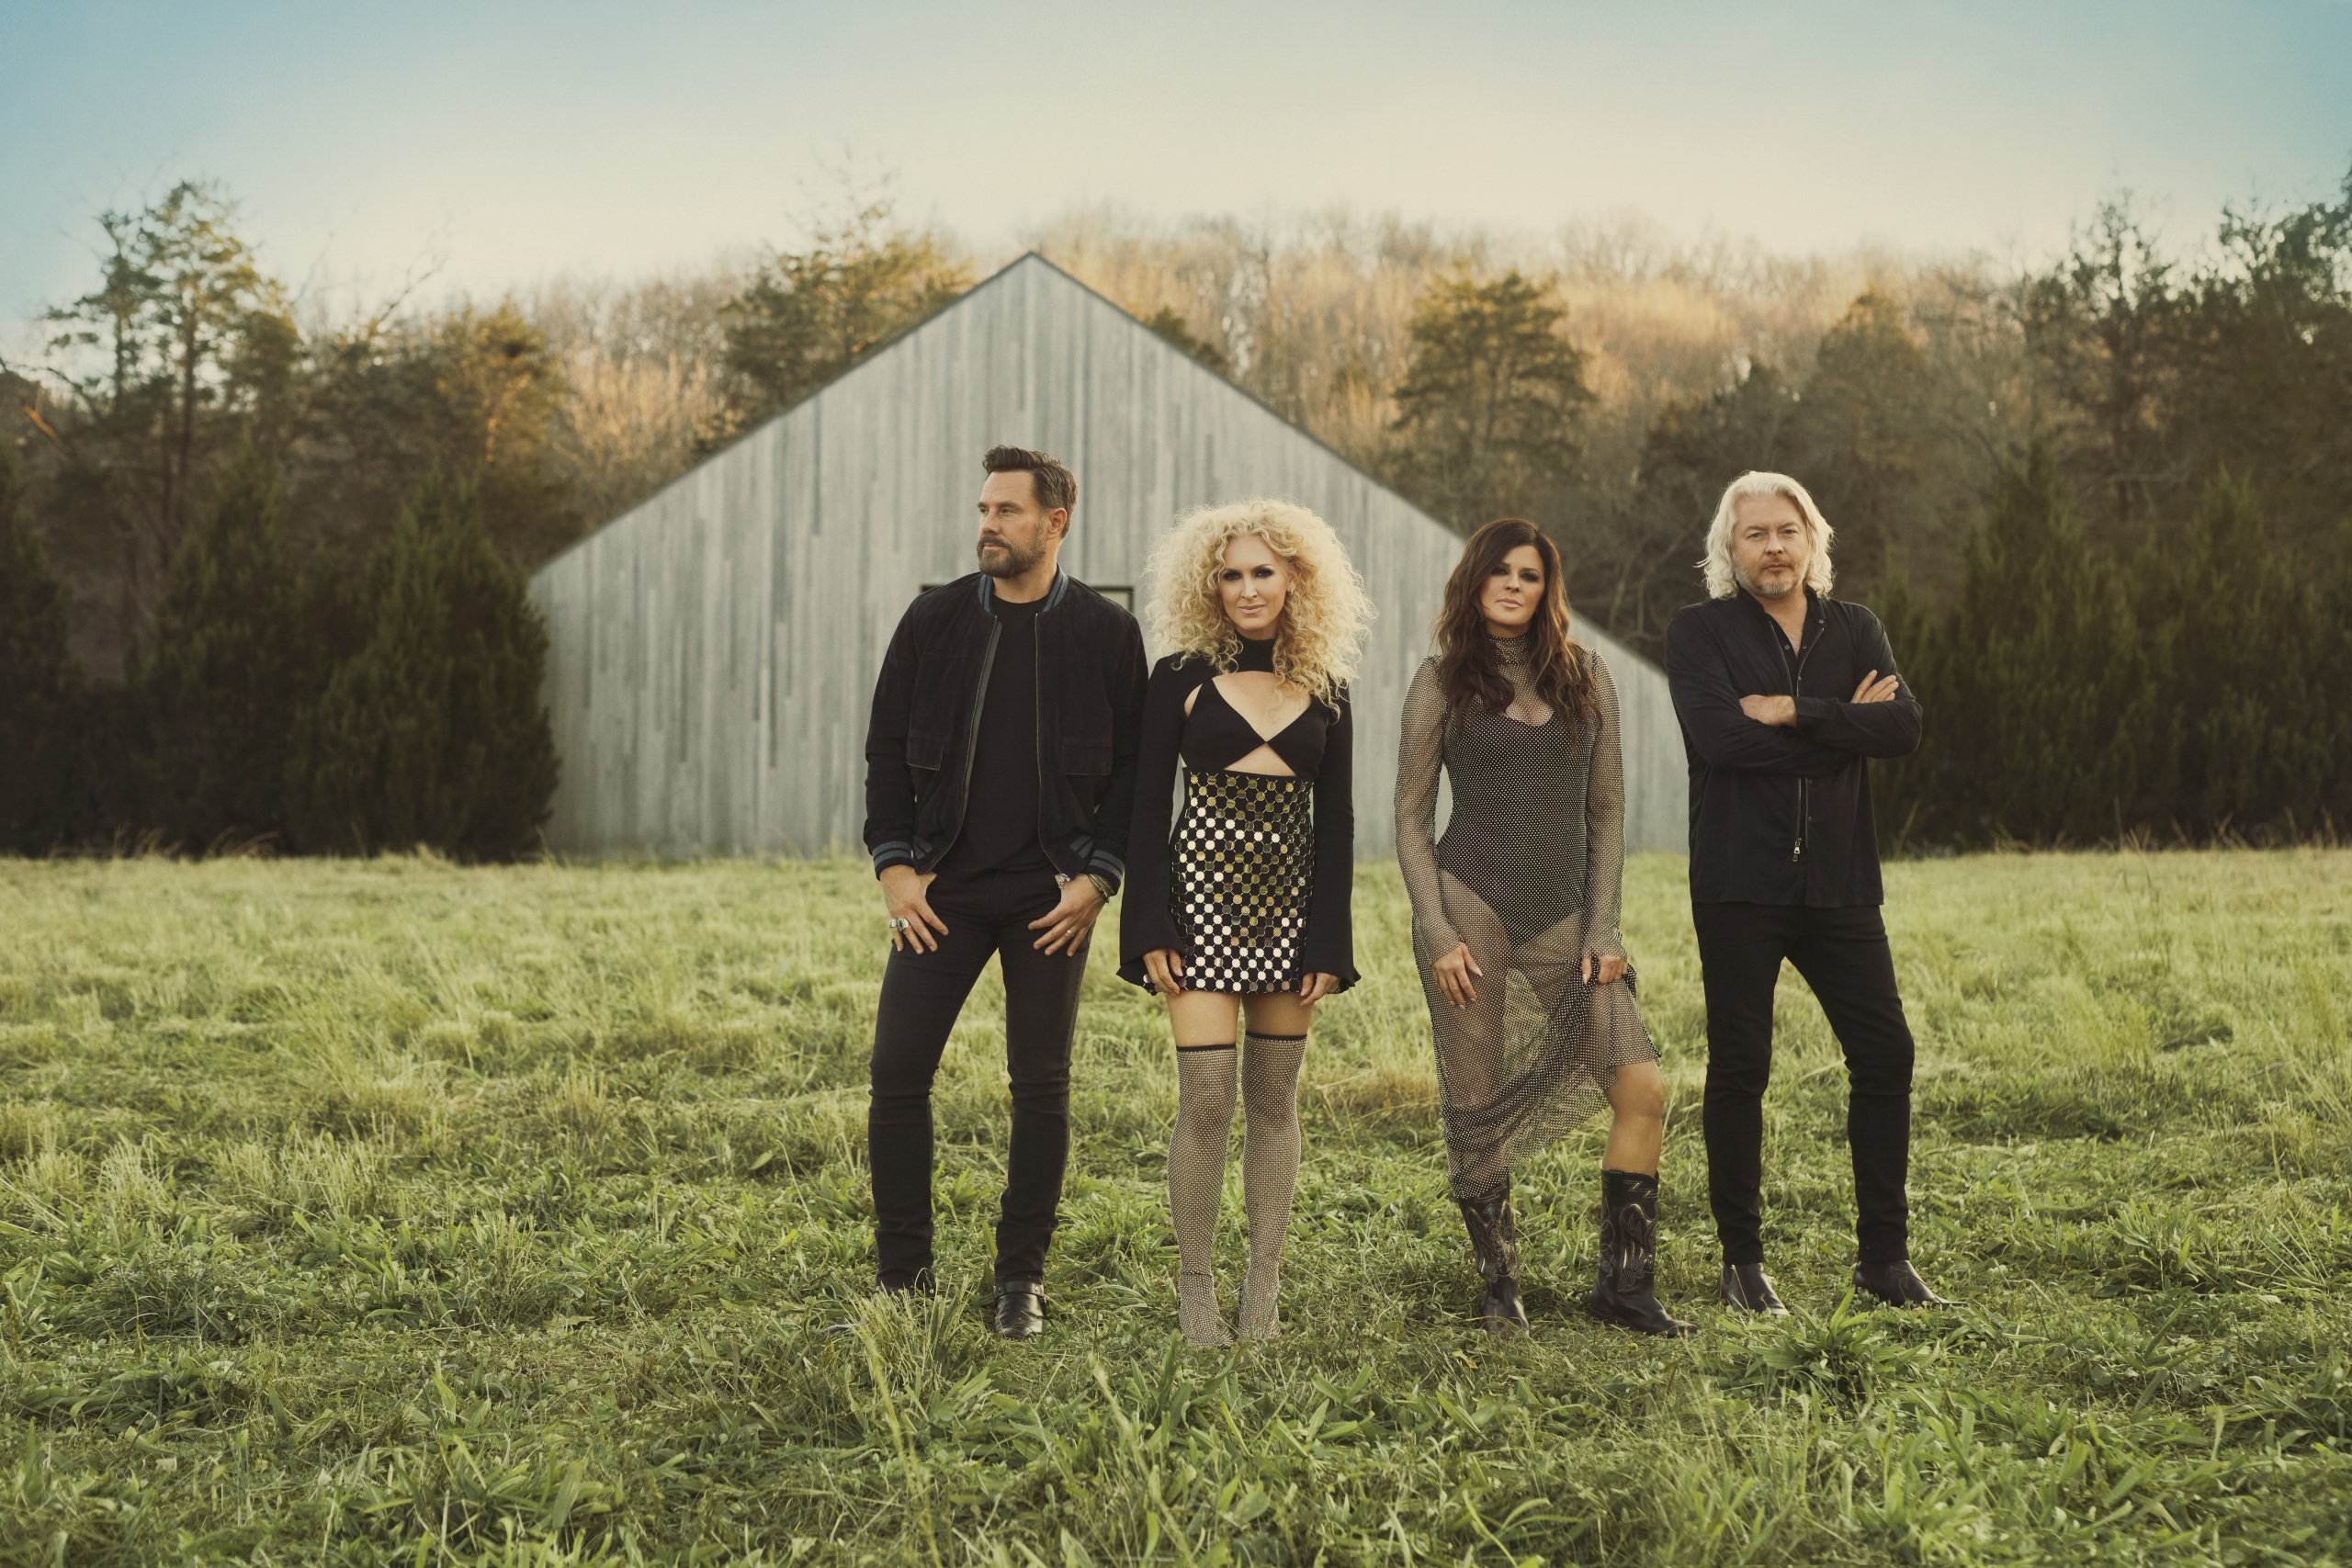 LITTLE BIG TOWN ANNOUNCES TAKE ME HOME TOUR FOLLOWING STUNNING CMT MUSIC AWARDS PERFORMANCE OF “TAKE ME HOME” WITH TOURING SPECIAL GUEST SUGARLAND